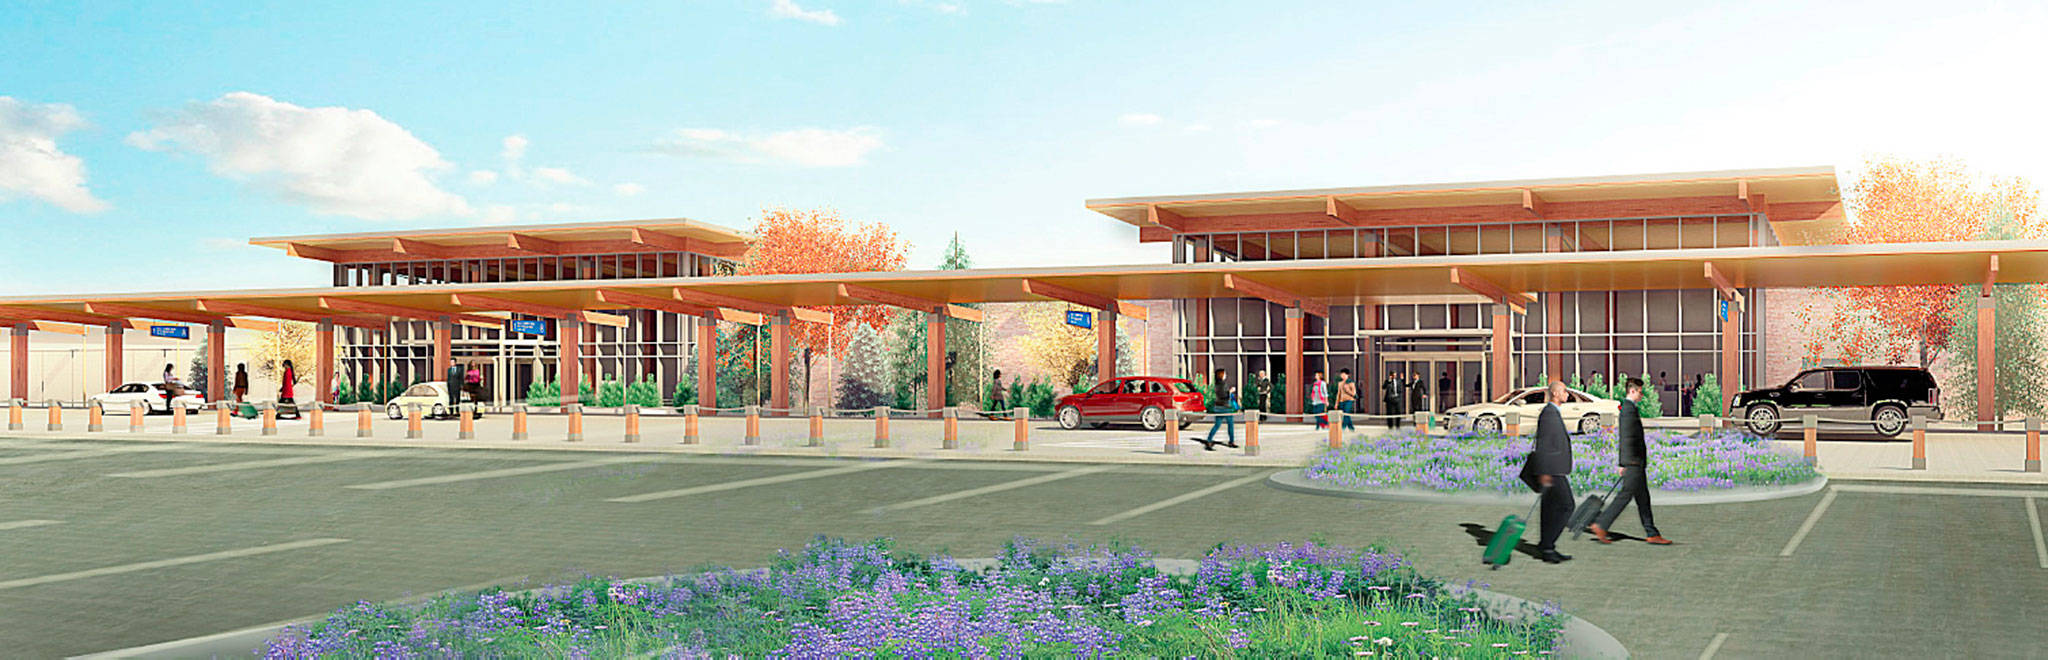 An artist’s rendering of the planned passenger terminal at Paine Field in Everett. (Propeller Airports)